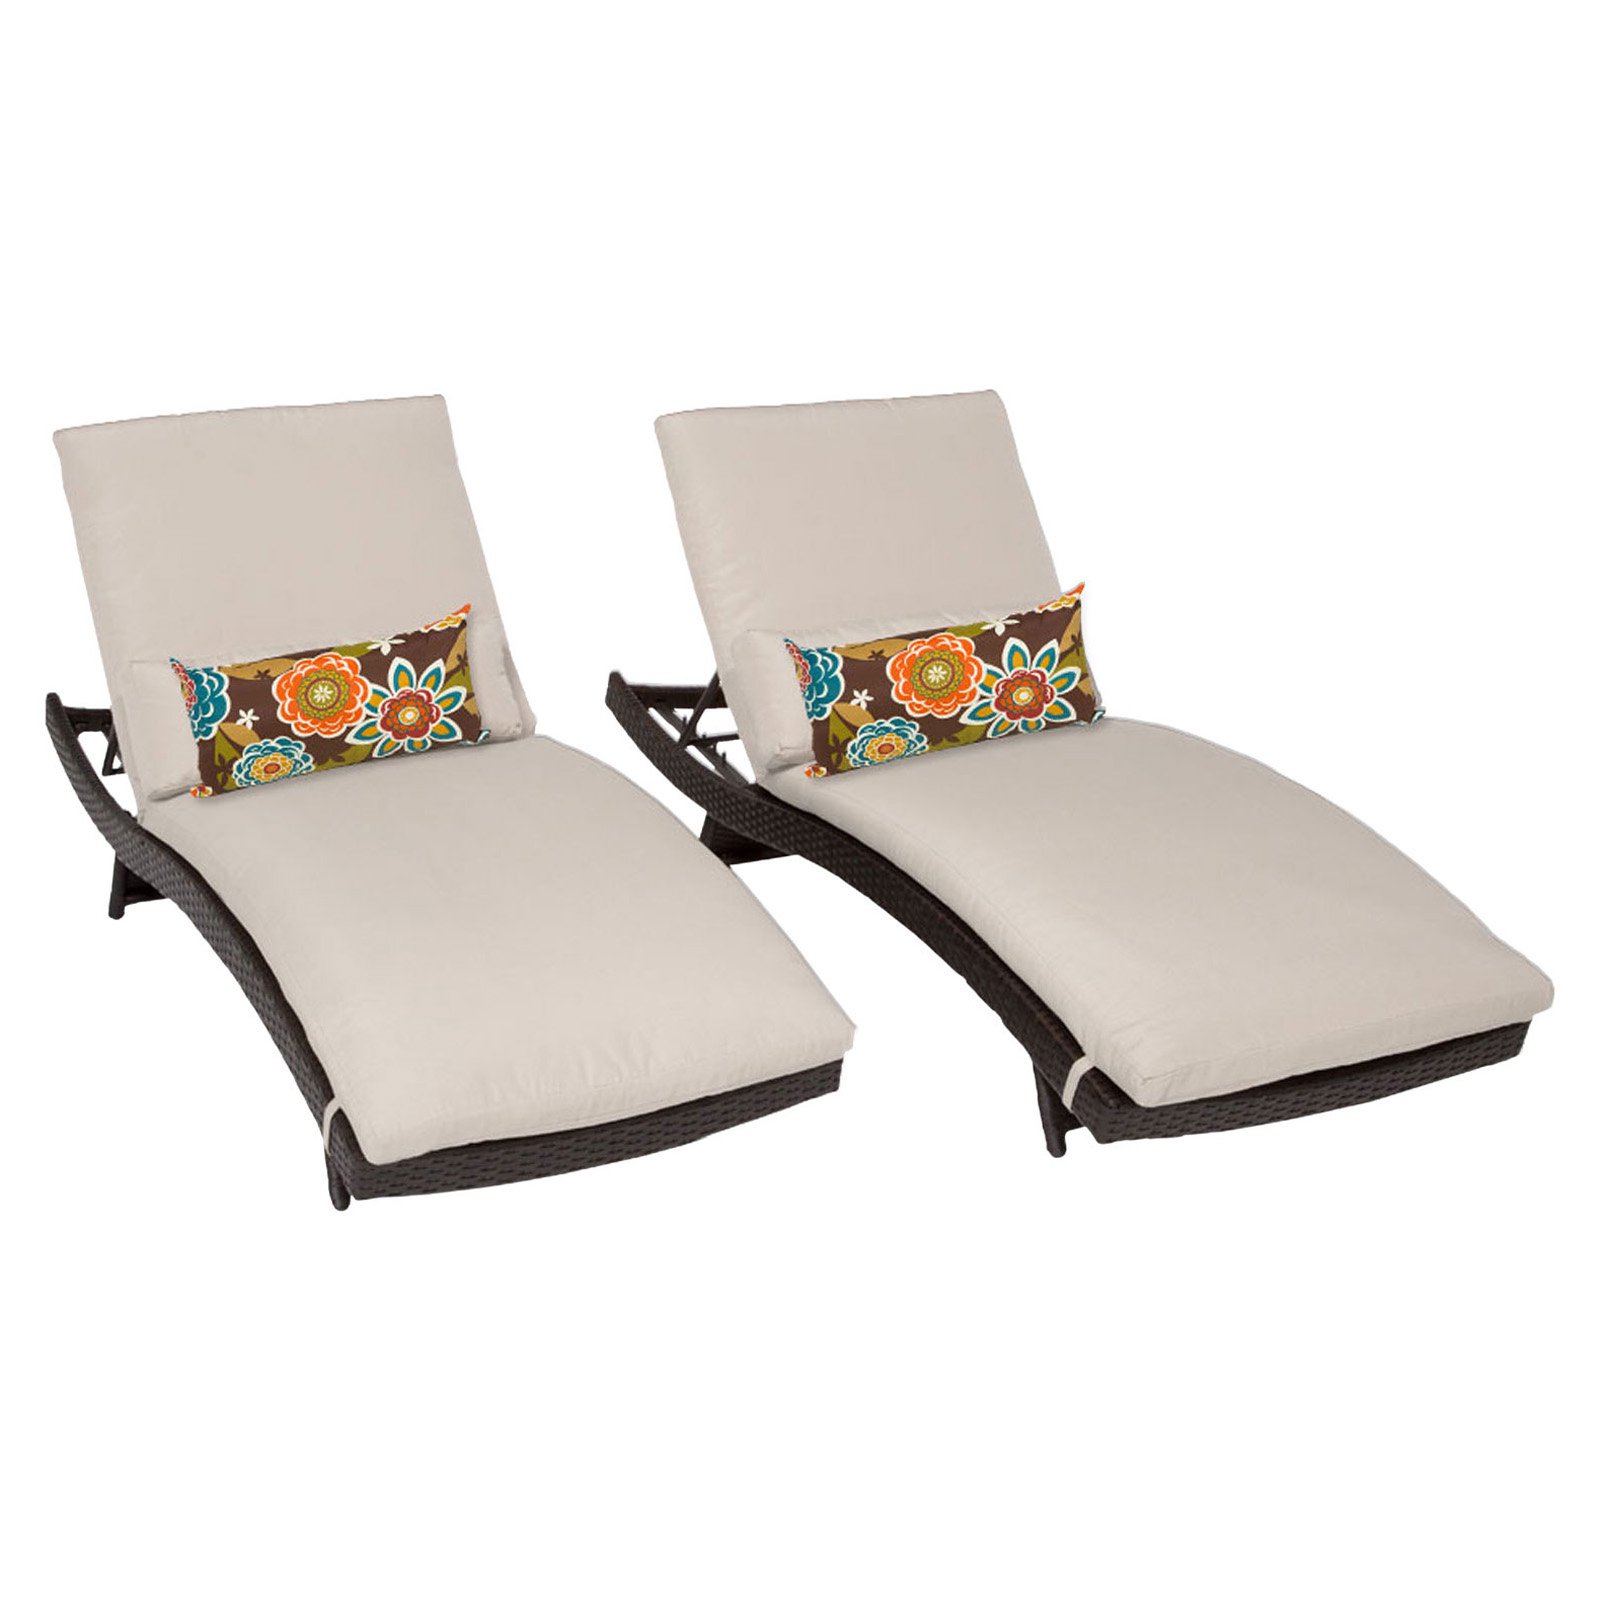 TK Classics Bali Adjustable Outdoor Chaise Lounge - Set of 2 Chairs and Cushion Covers - image 2 of 2